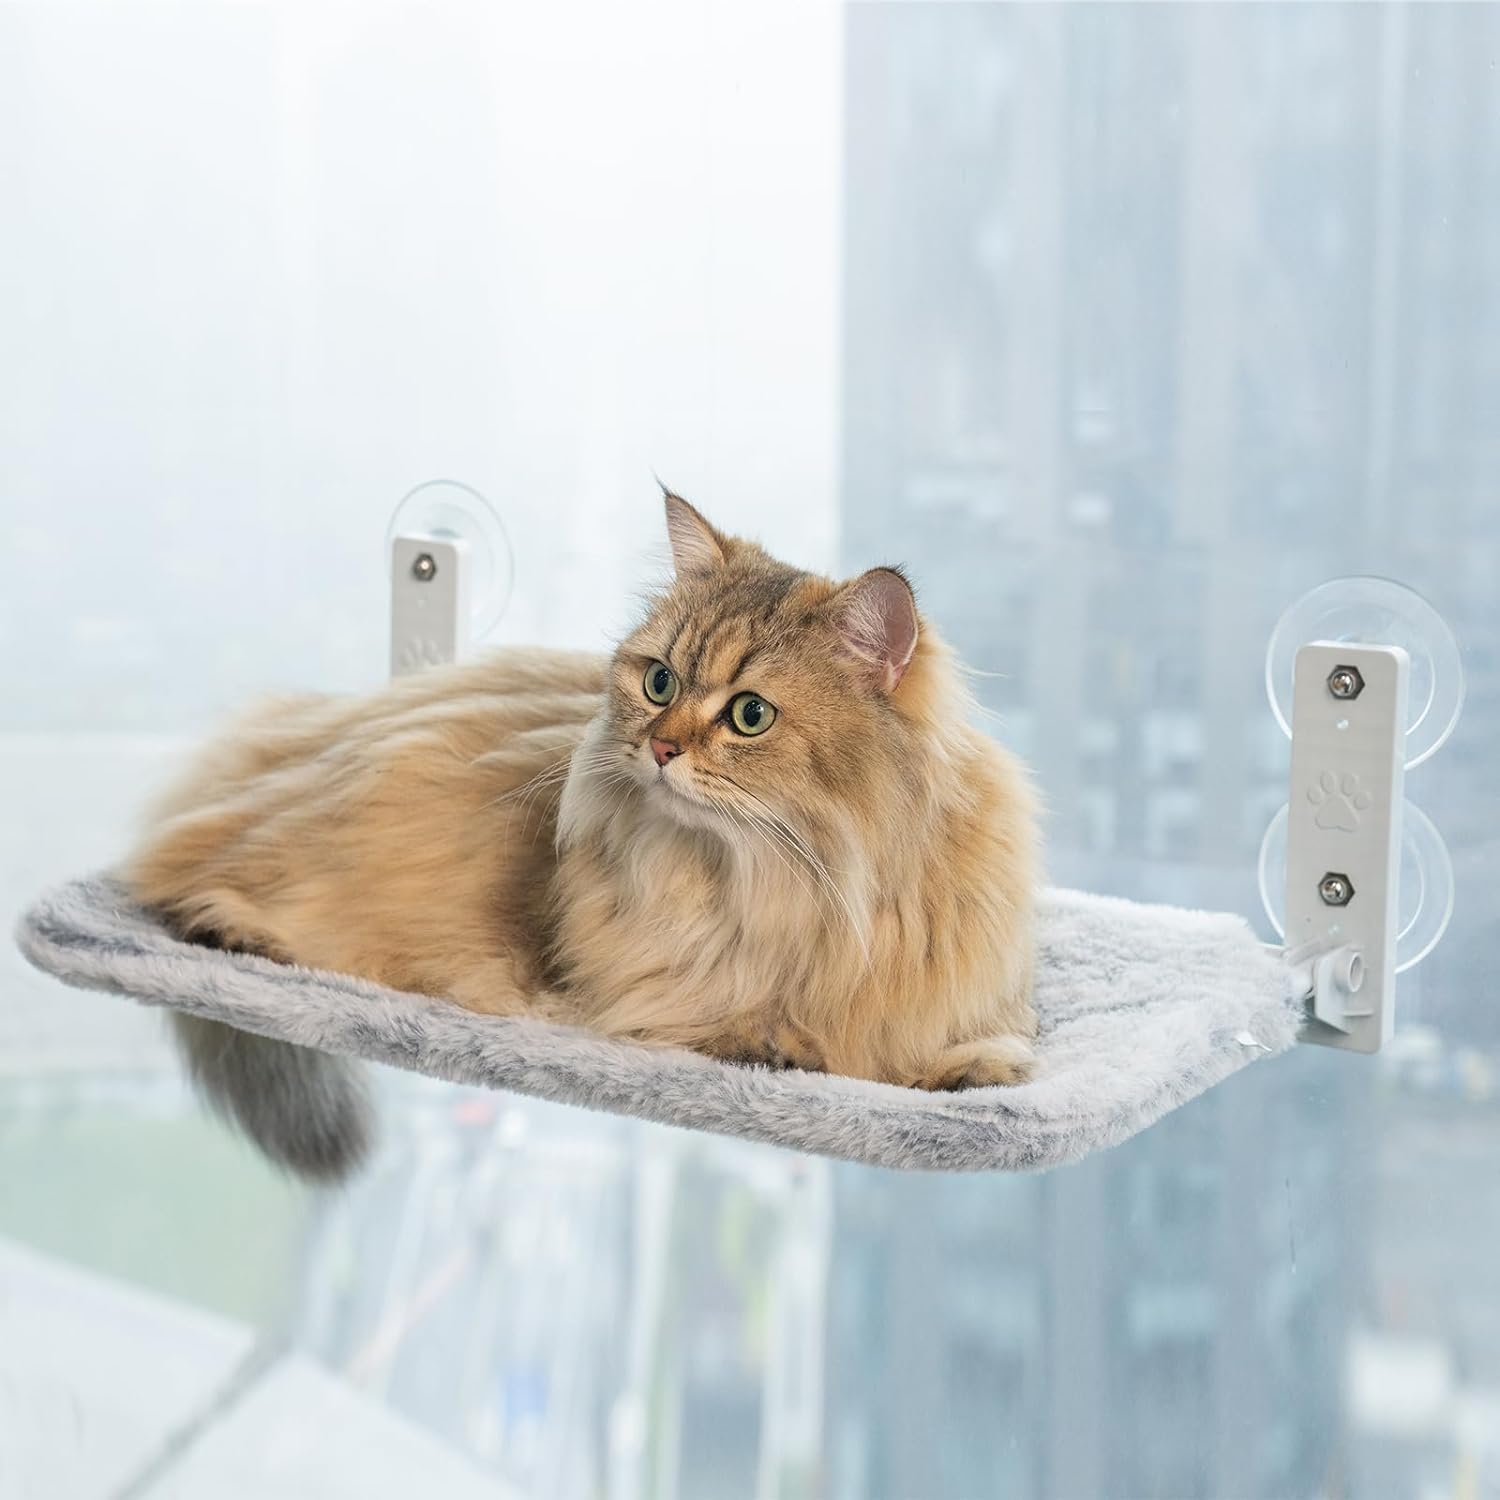 PETSWOL Foldable Cordless Cat Window Perch For Wall With Strong Suction Cups_2